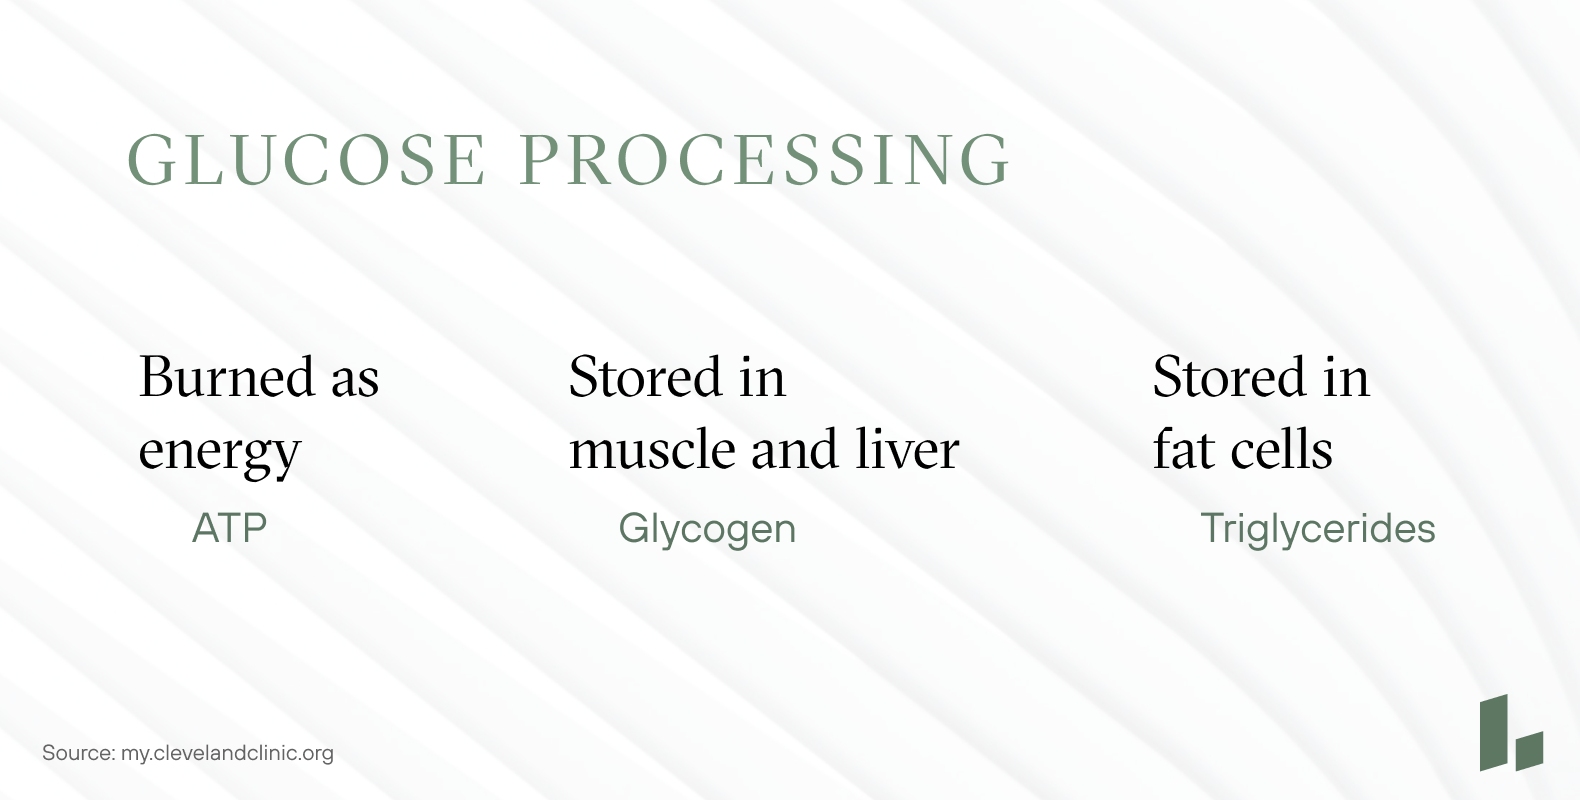 how glucose processing works